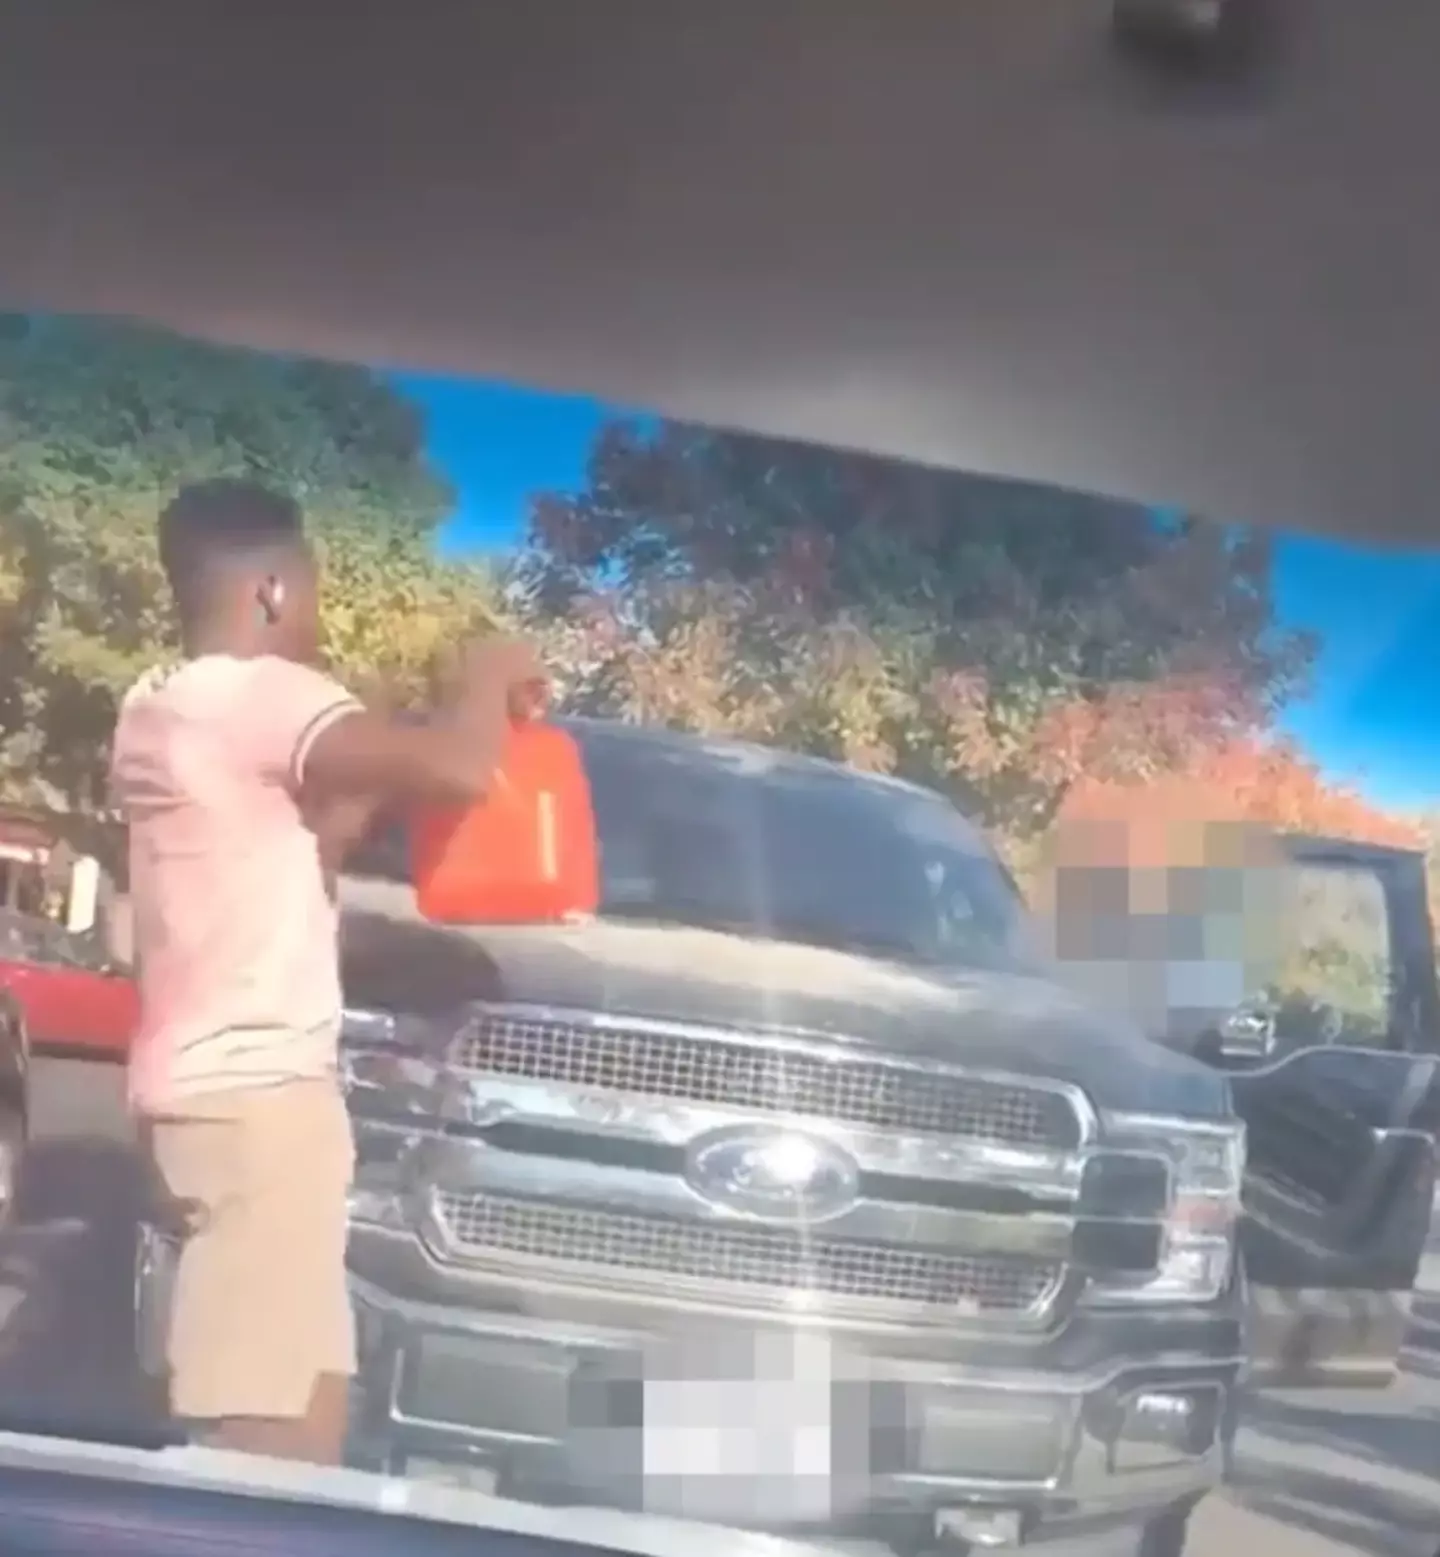 Live streamer pouring 'gasoline' on cars for a prank.